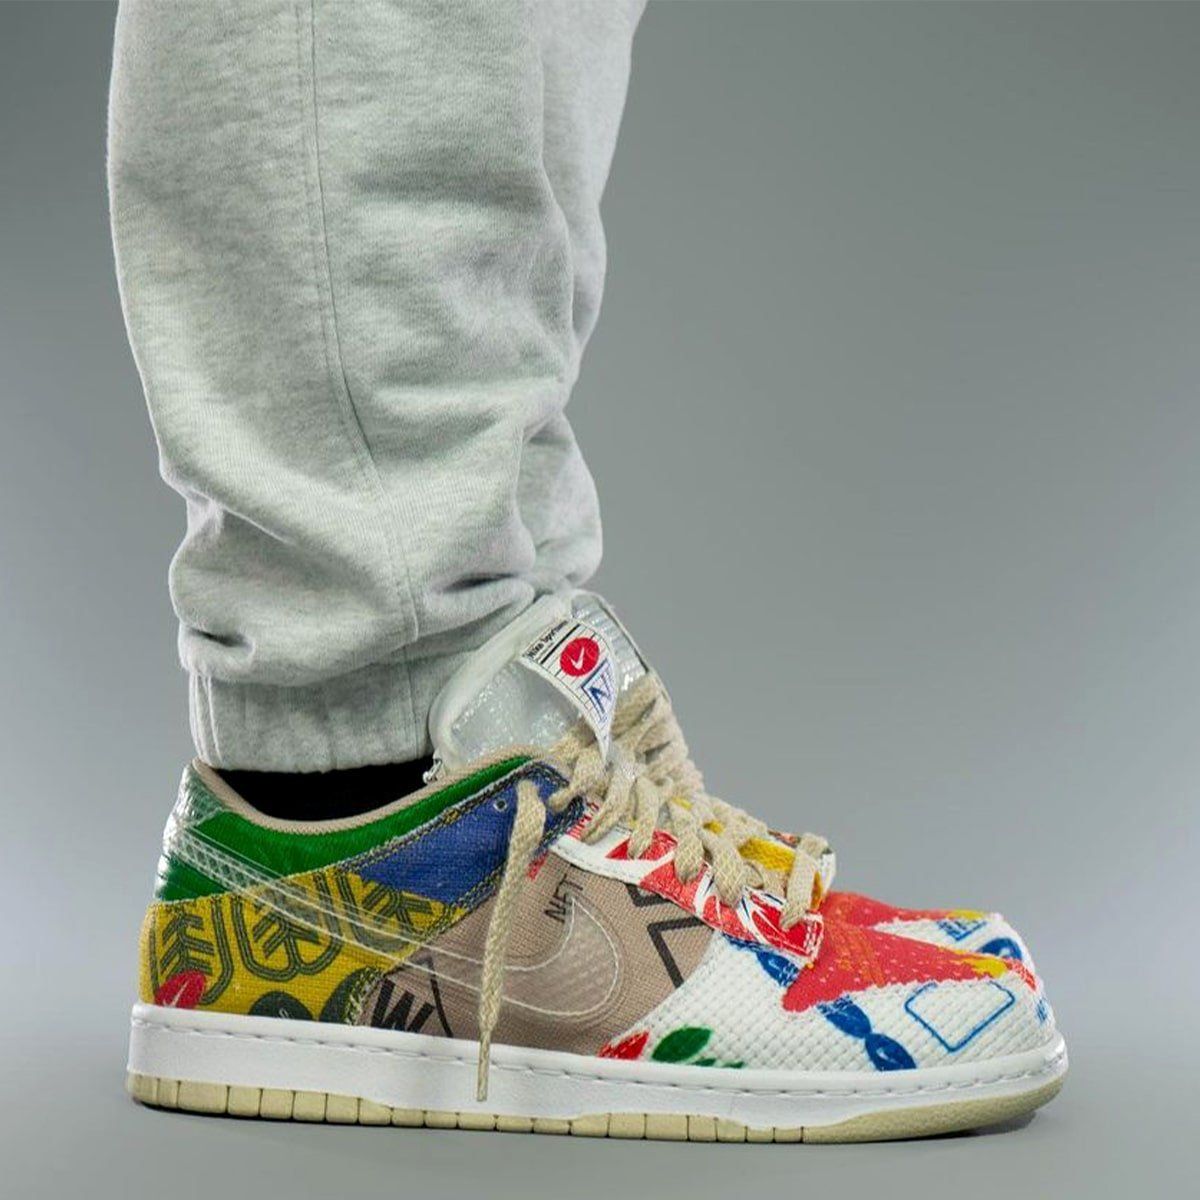 Where to Buy the Nike Dunk Low “City Market” | HOUSE OF HEAT